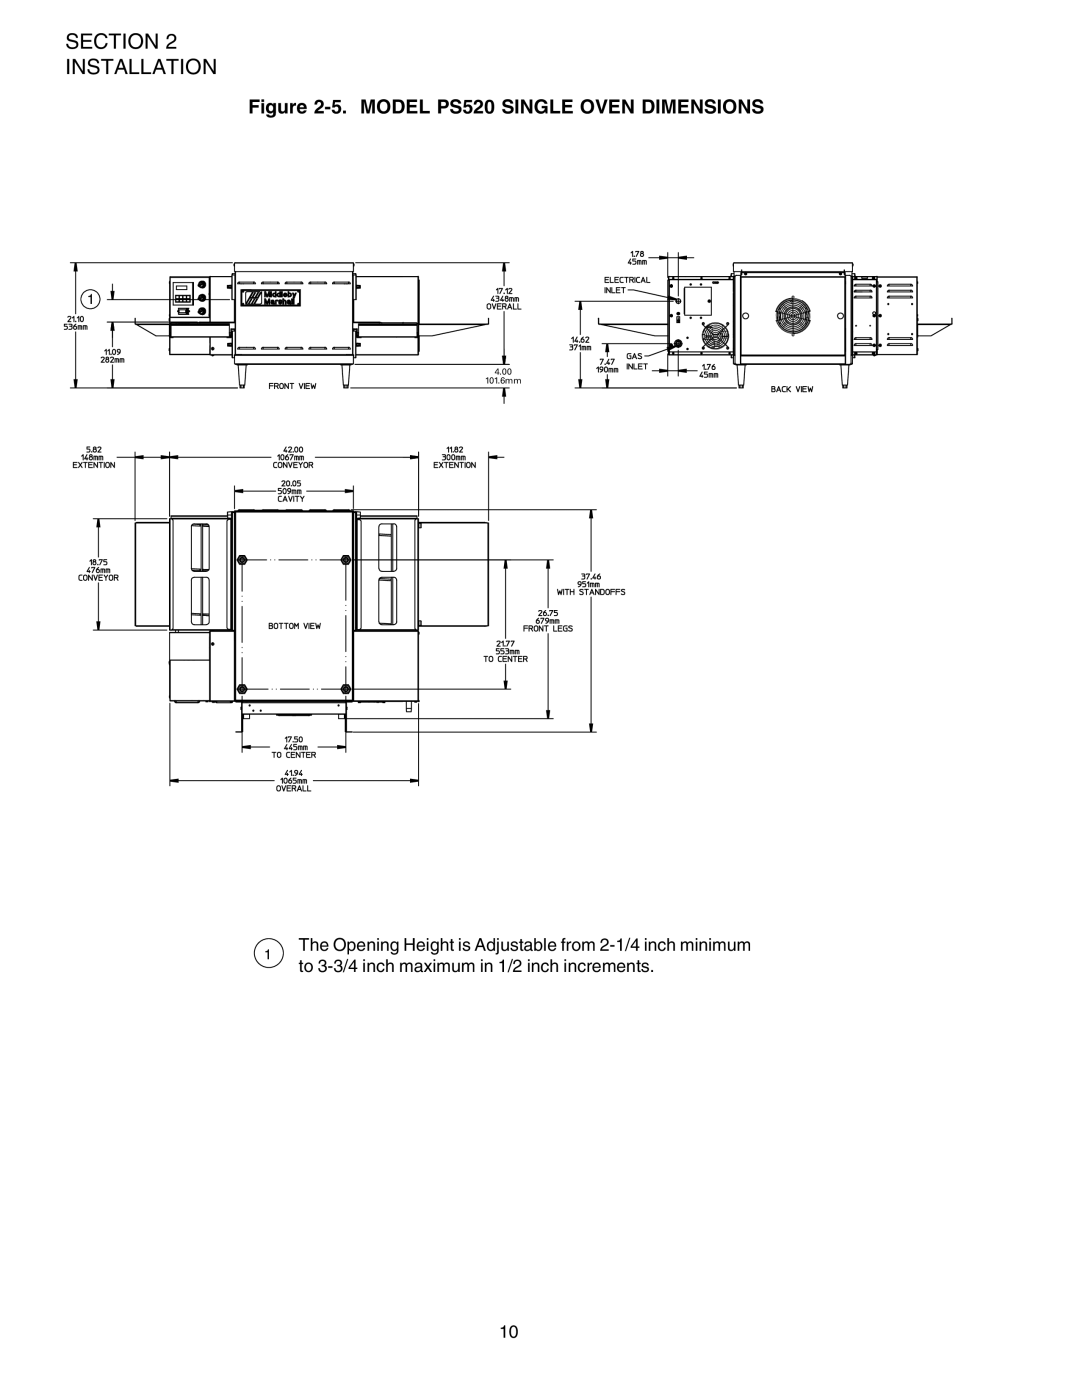 Middleby Marshall PS520G installation manual 5.MODEL PS520 SINGLE OVEN DIMENSIONS, 4.00 101.6mm 